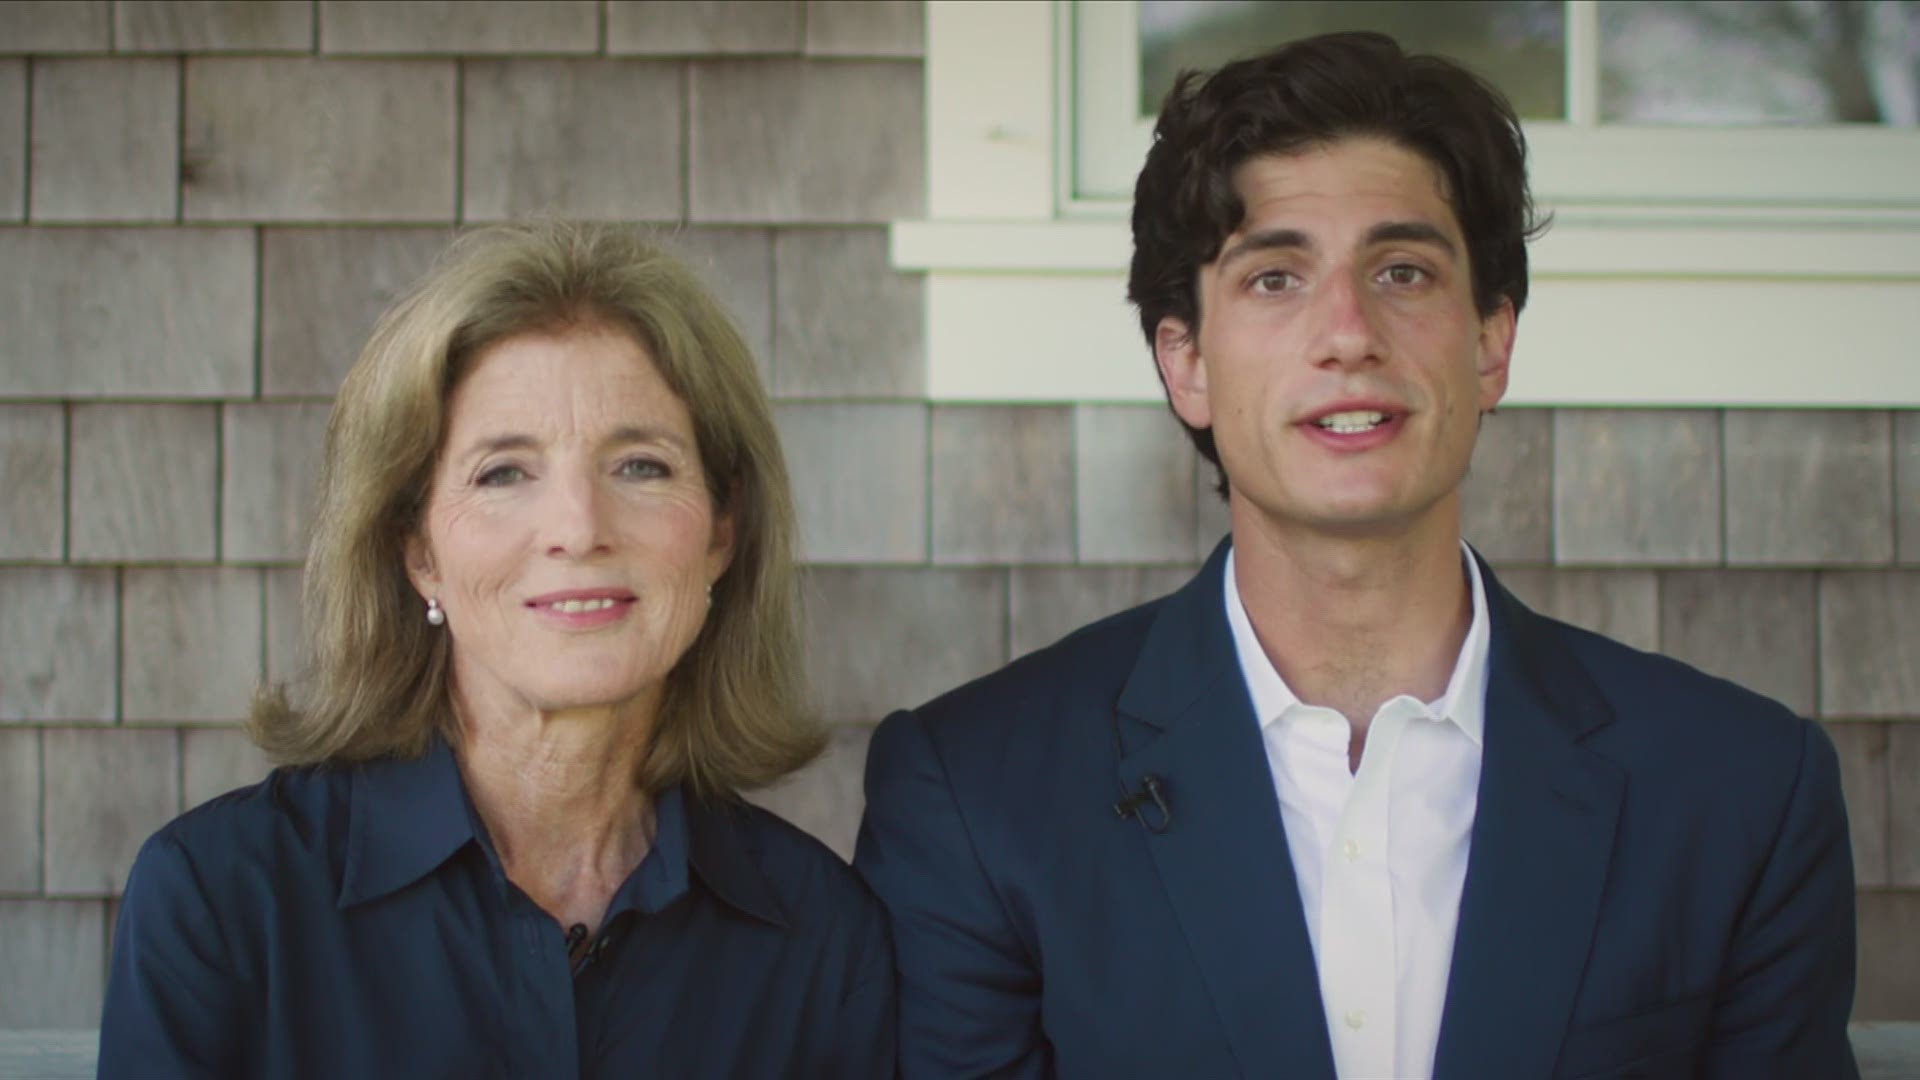 Caroline Kennedy and her son, Jack, spoke Tuesday at the Democratic National Convention.